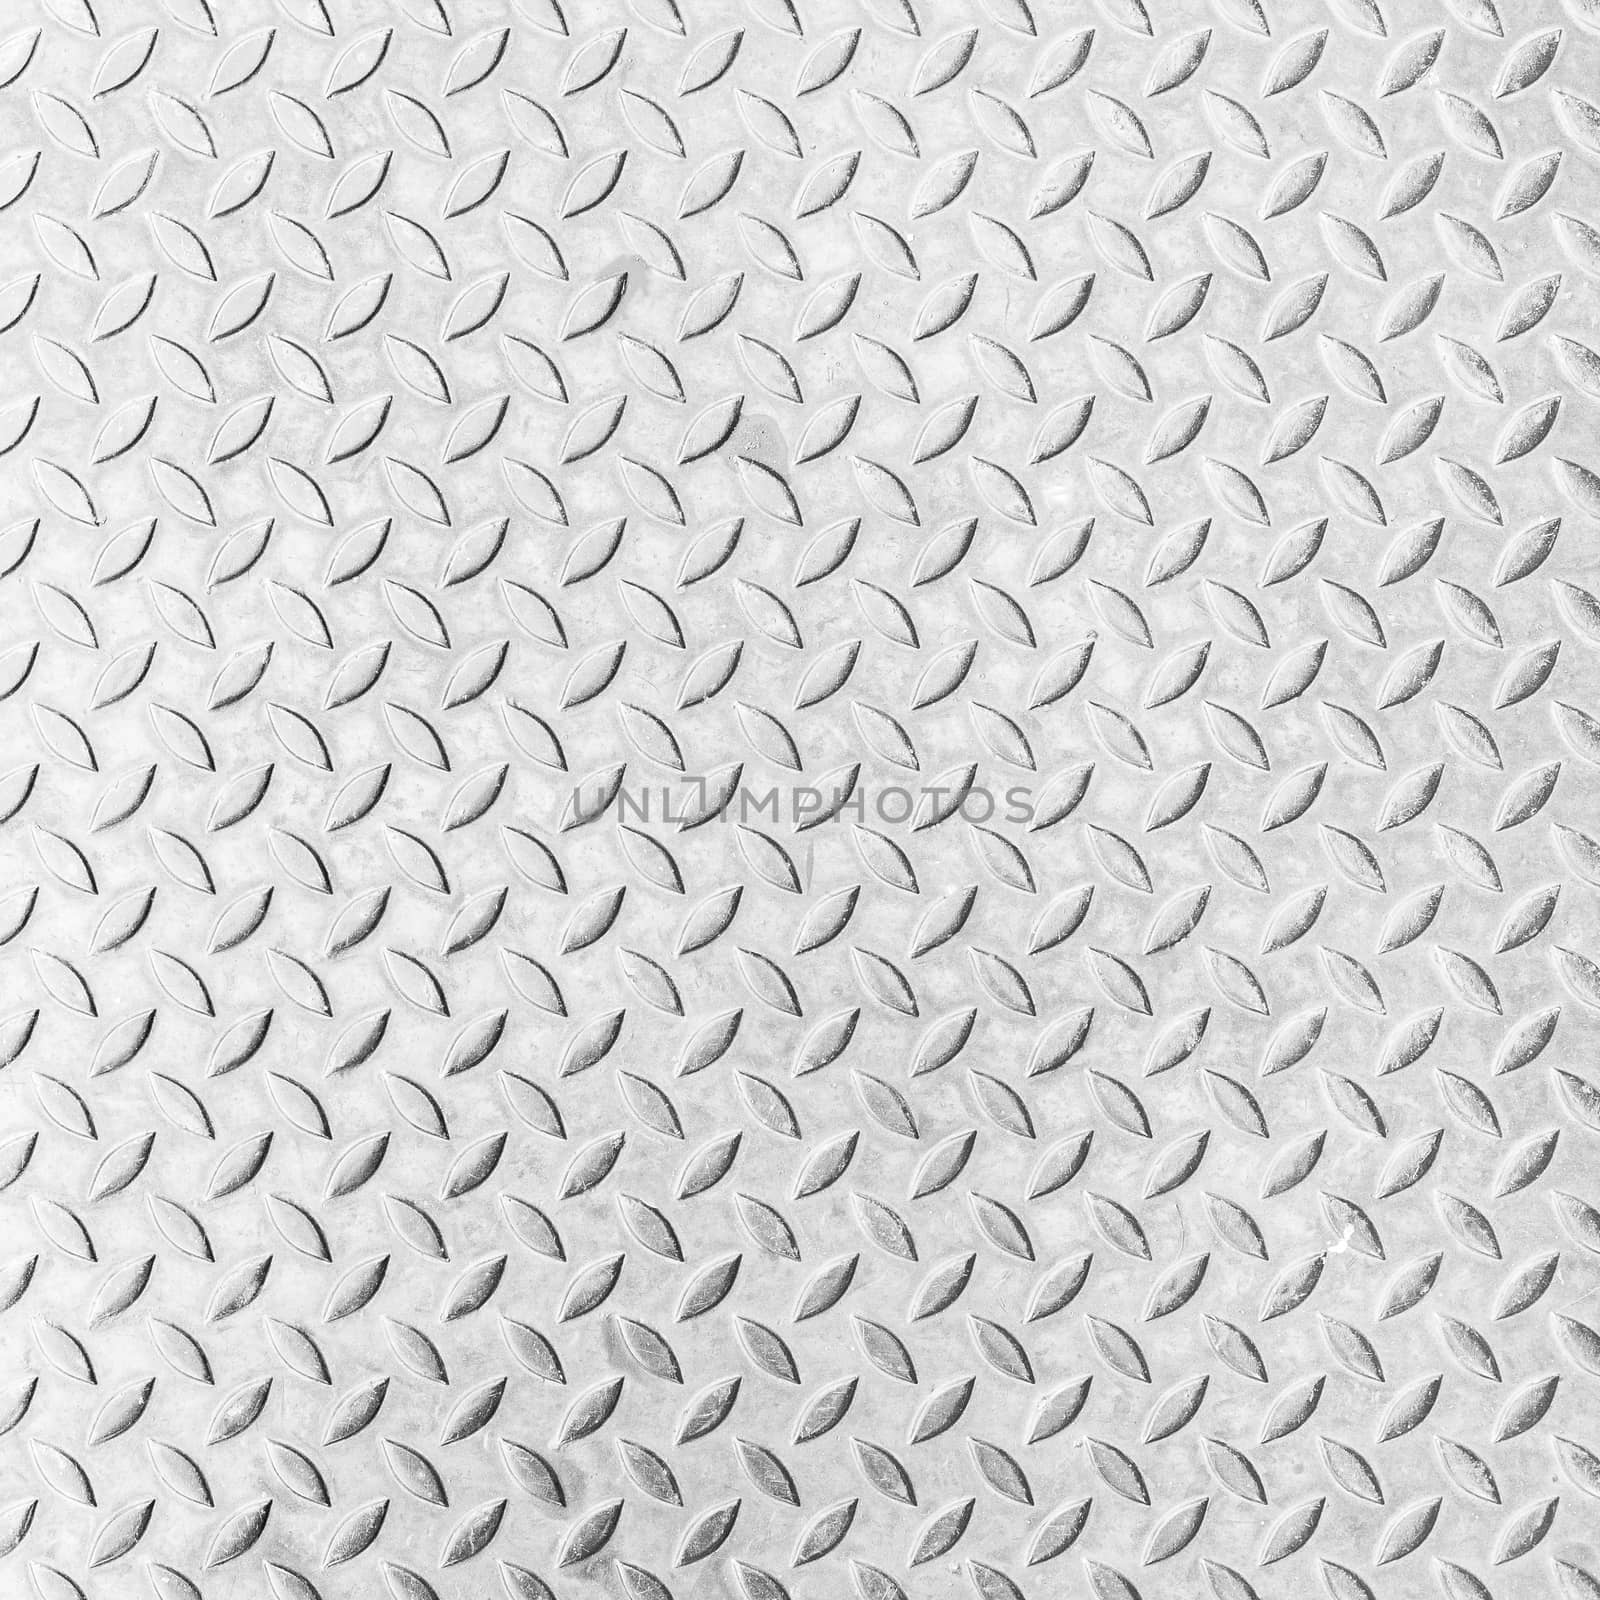 White background texture of grunged metal pattern by Suriyaphoto